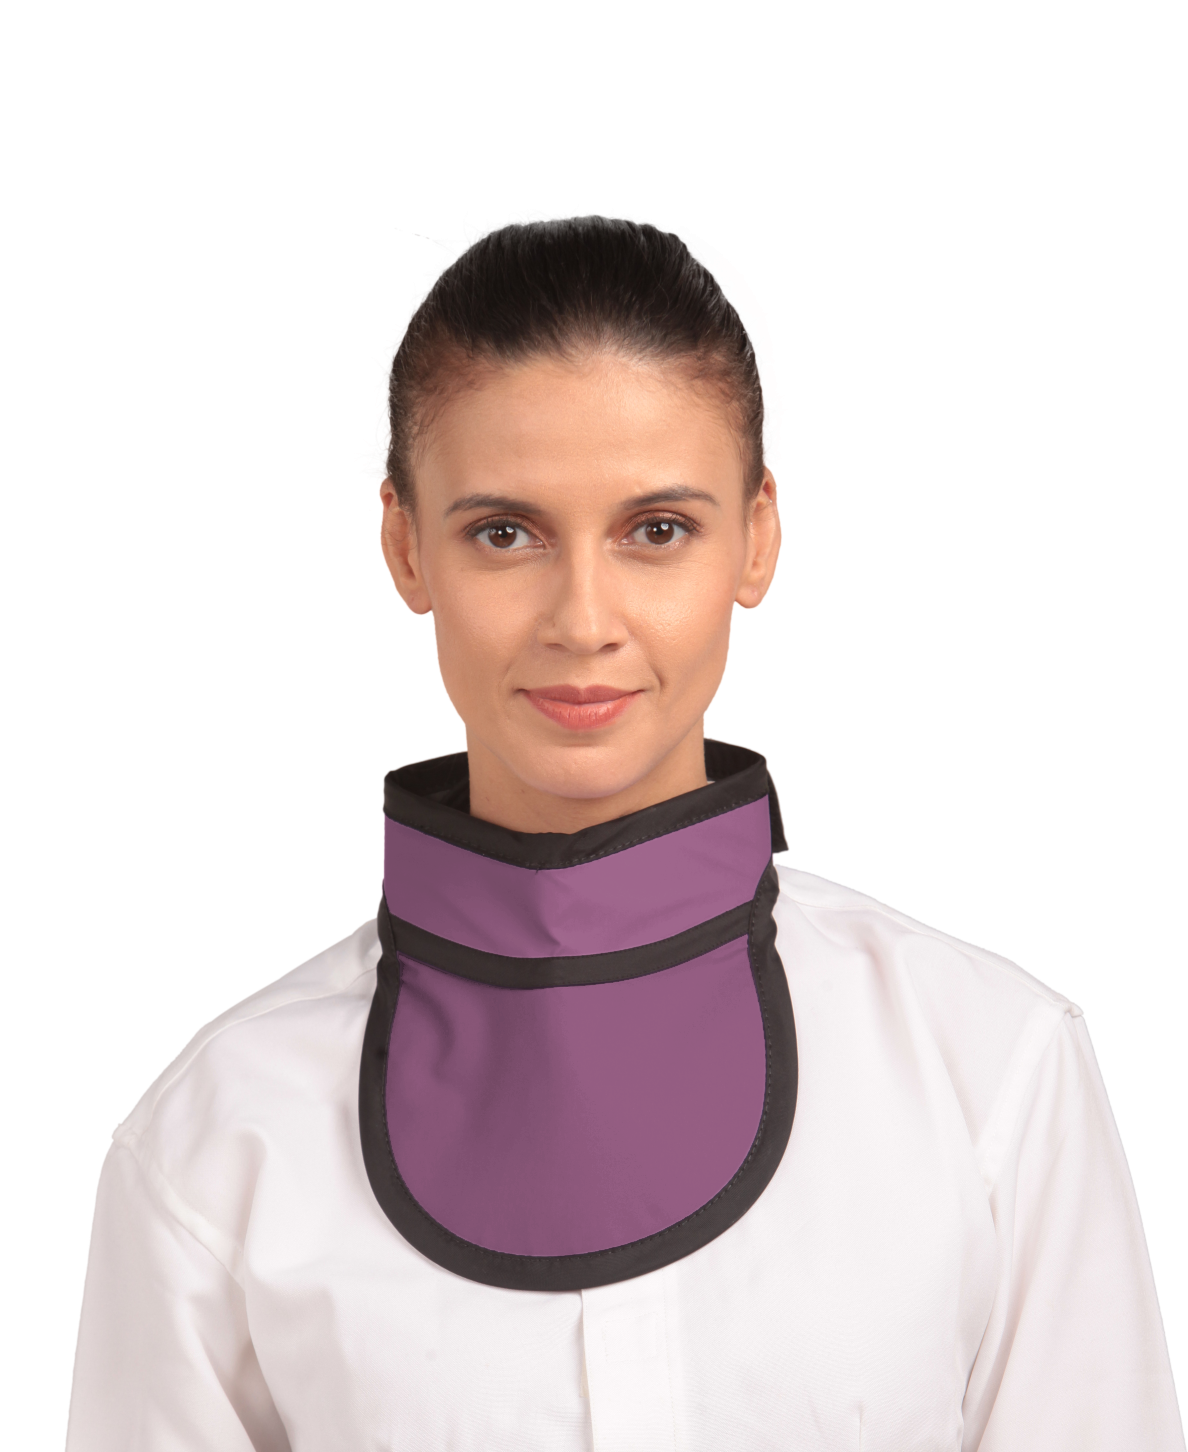 Frontal view of a female model wearing a mauve thyroid collar “Slim” lined with black around the outer edges.